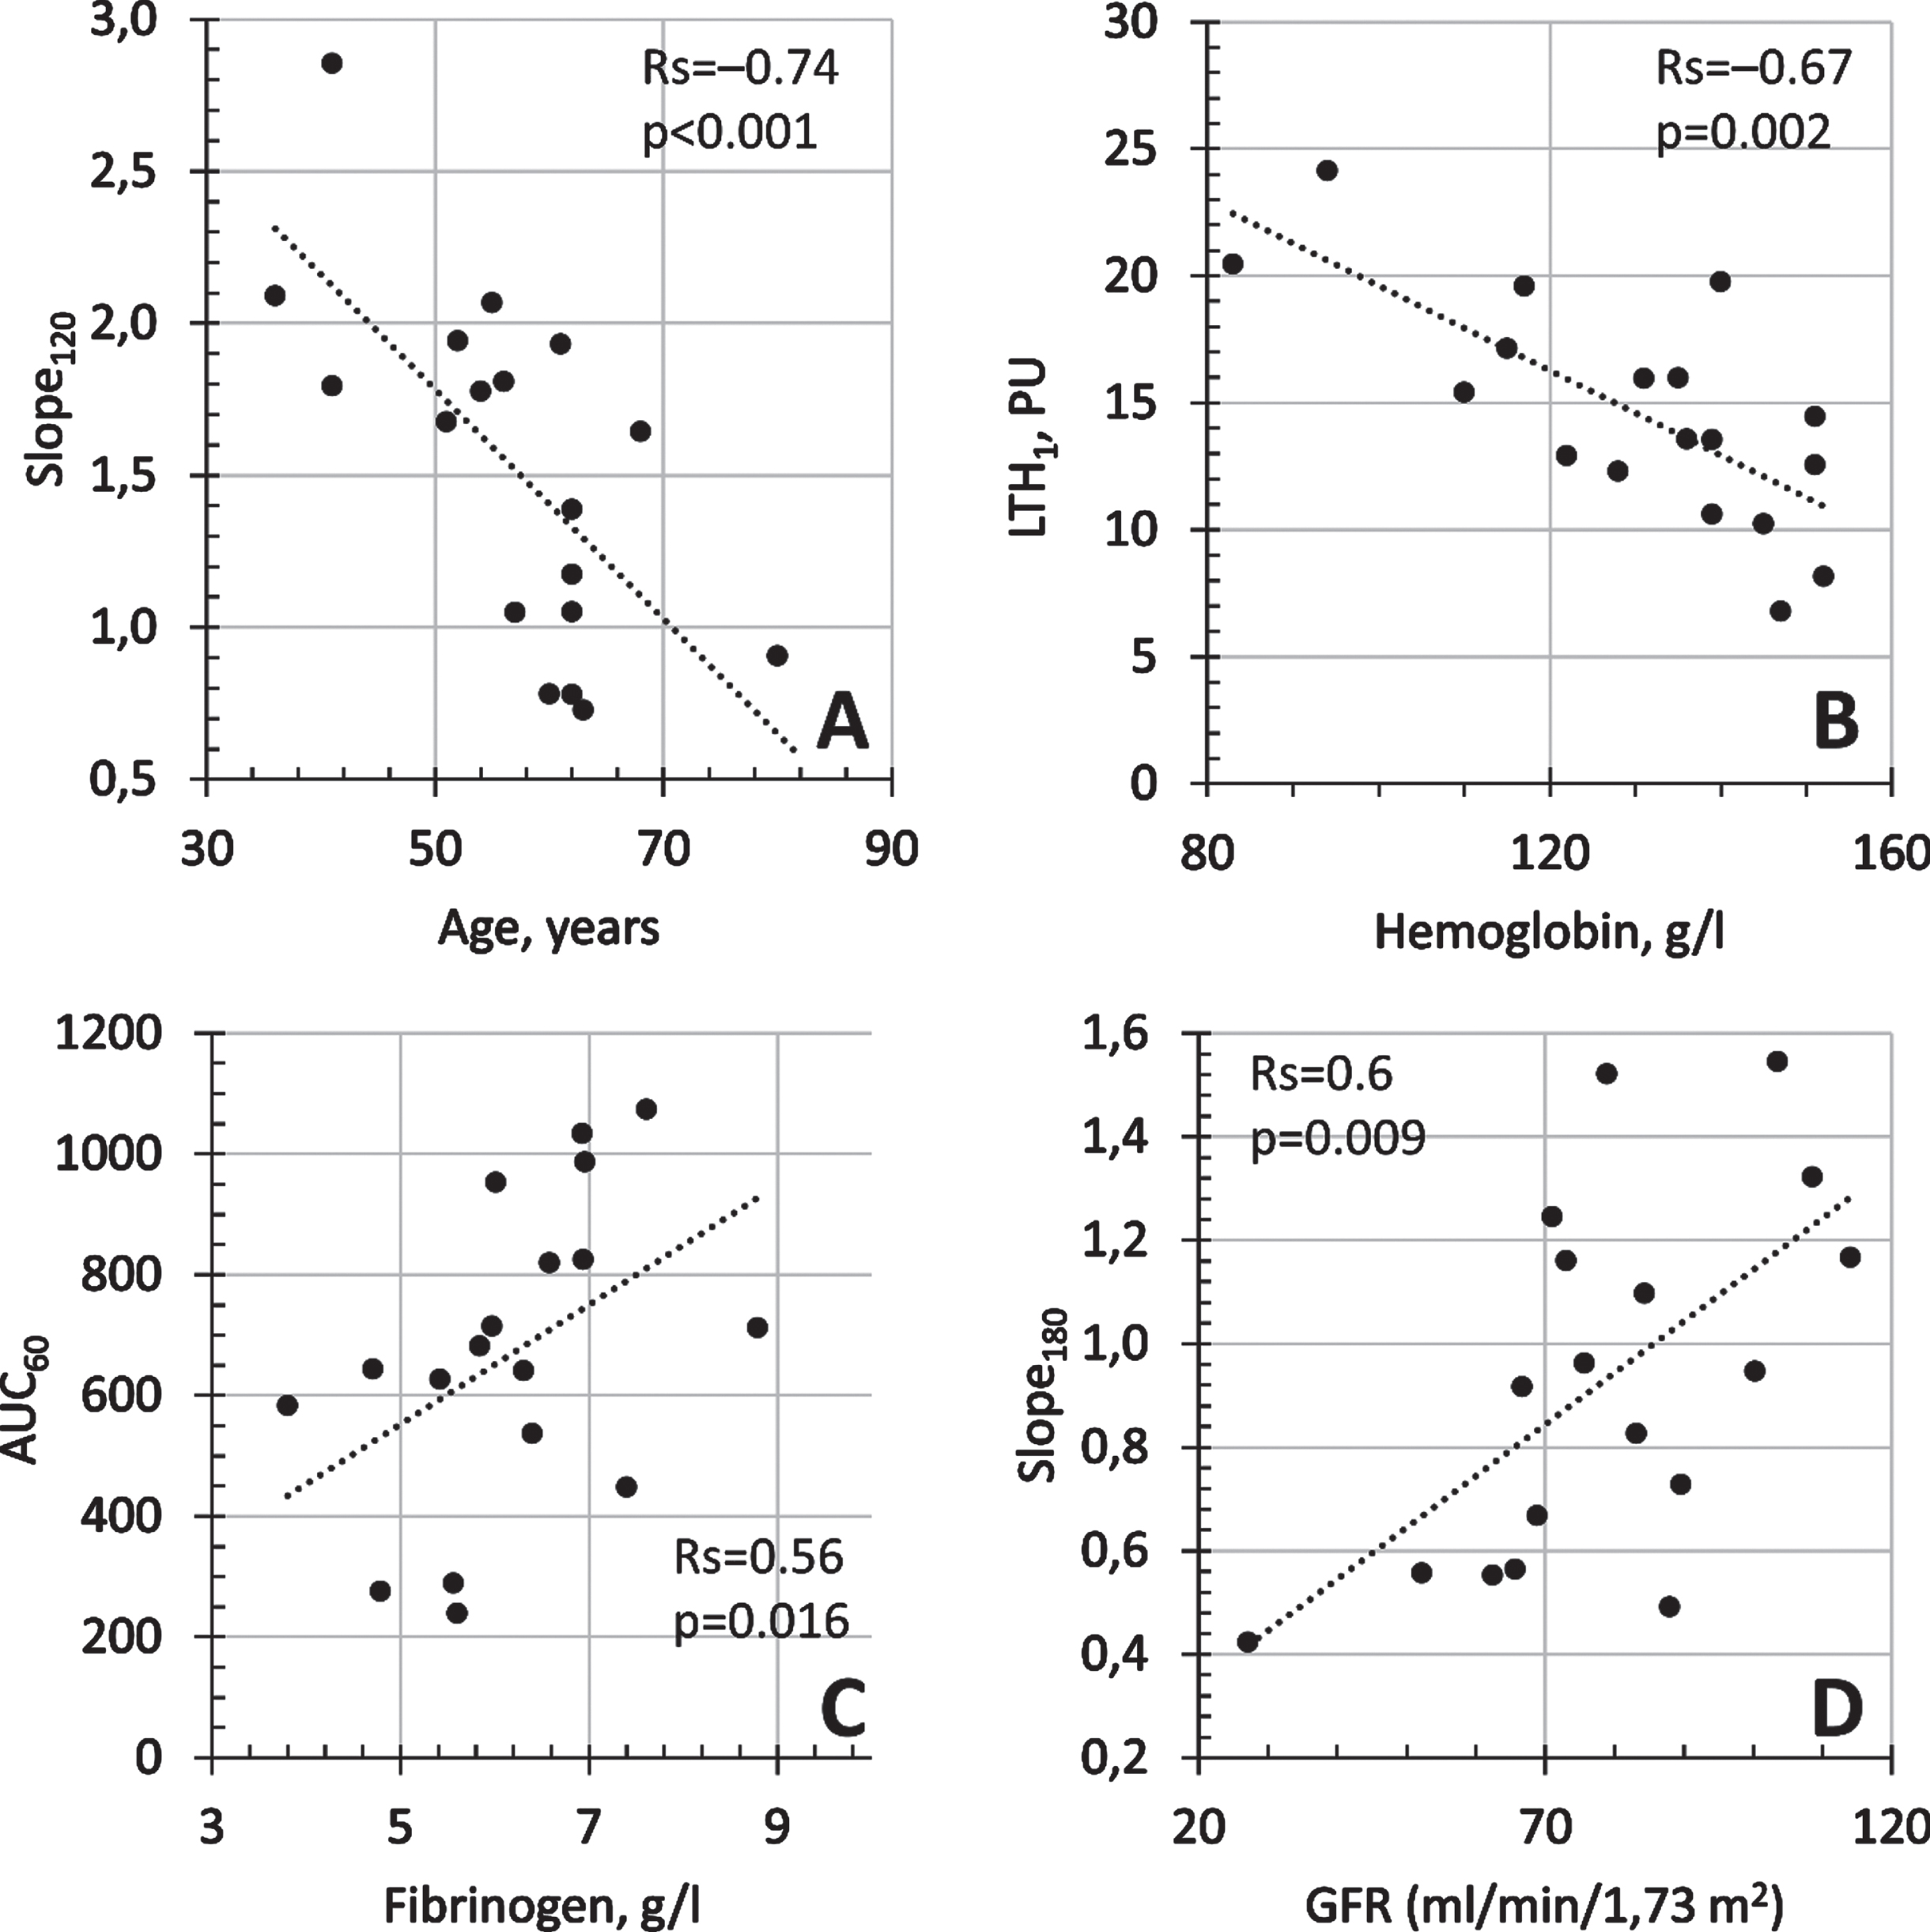 Correlations between skin microvascular reactivity indices and clinical and demographic characteristics of patients. A - Slope120 and age of patients, B - LTH1 and haemoglobin (g/l), C –AUC60 and Fibrinogen (g/l), D - Slope180 and GFR (ml/min/1.73m2).